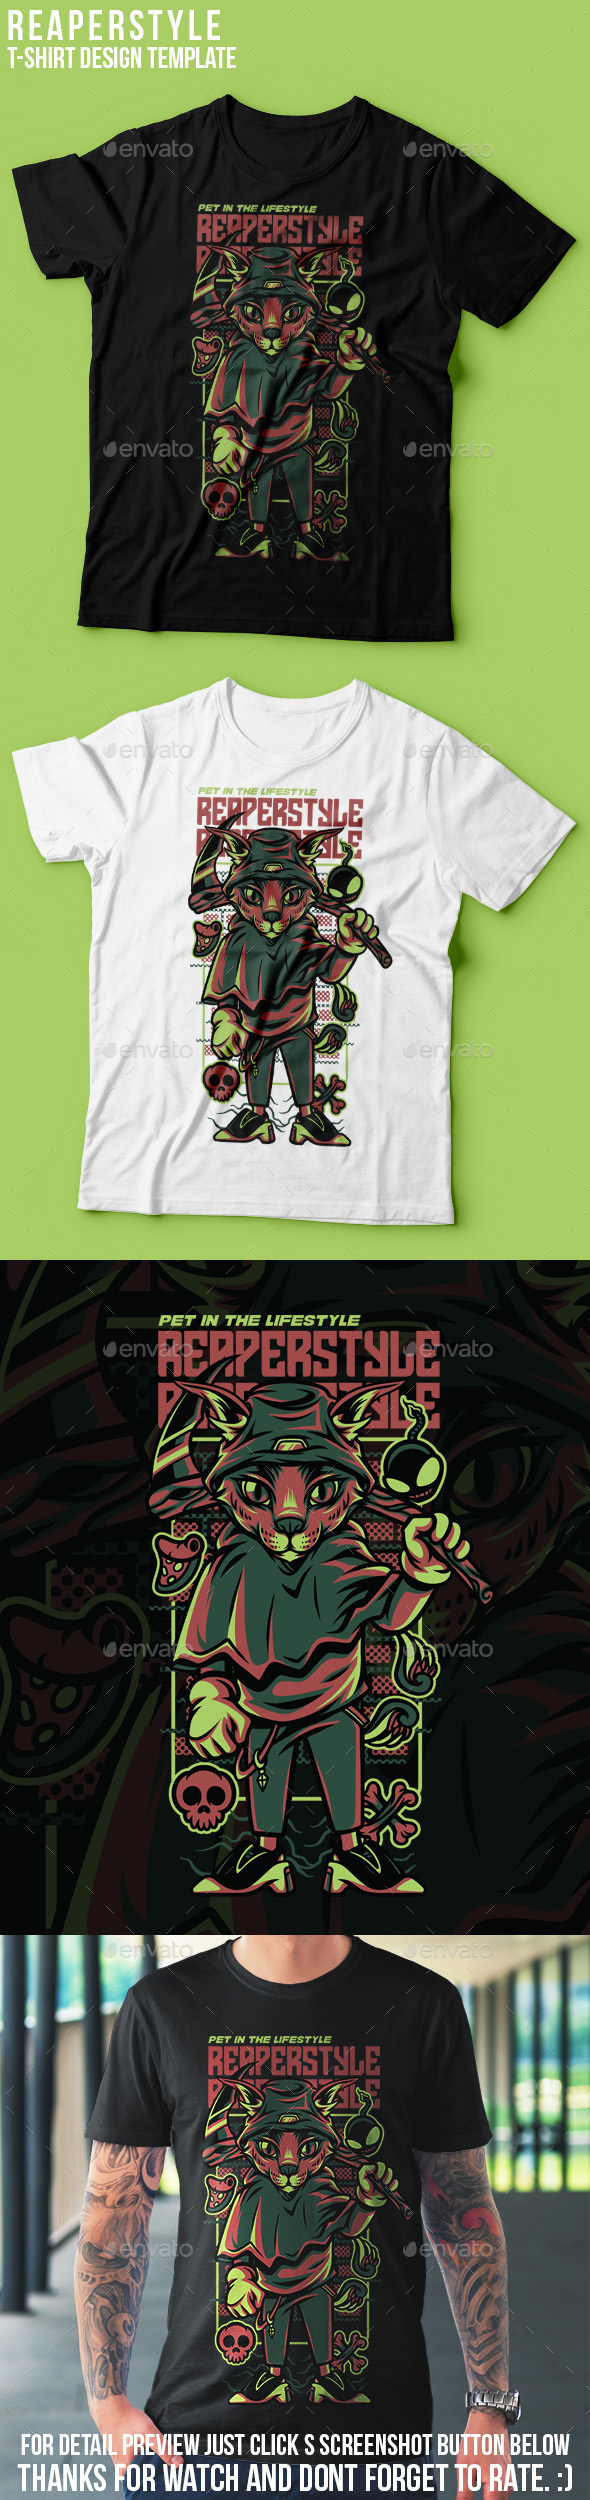 [DOWNLOAD]Reaper Style T-Shirt Design